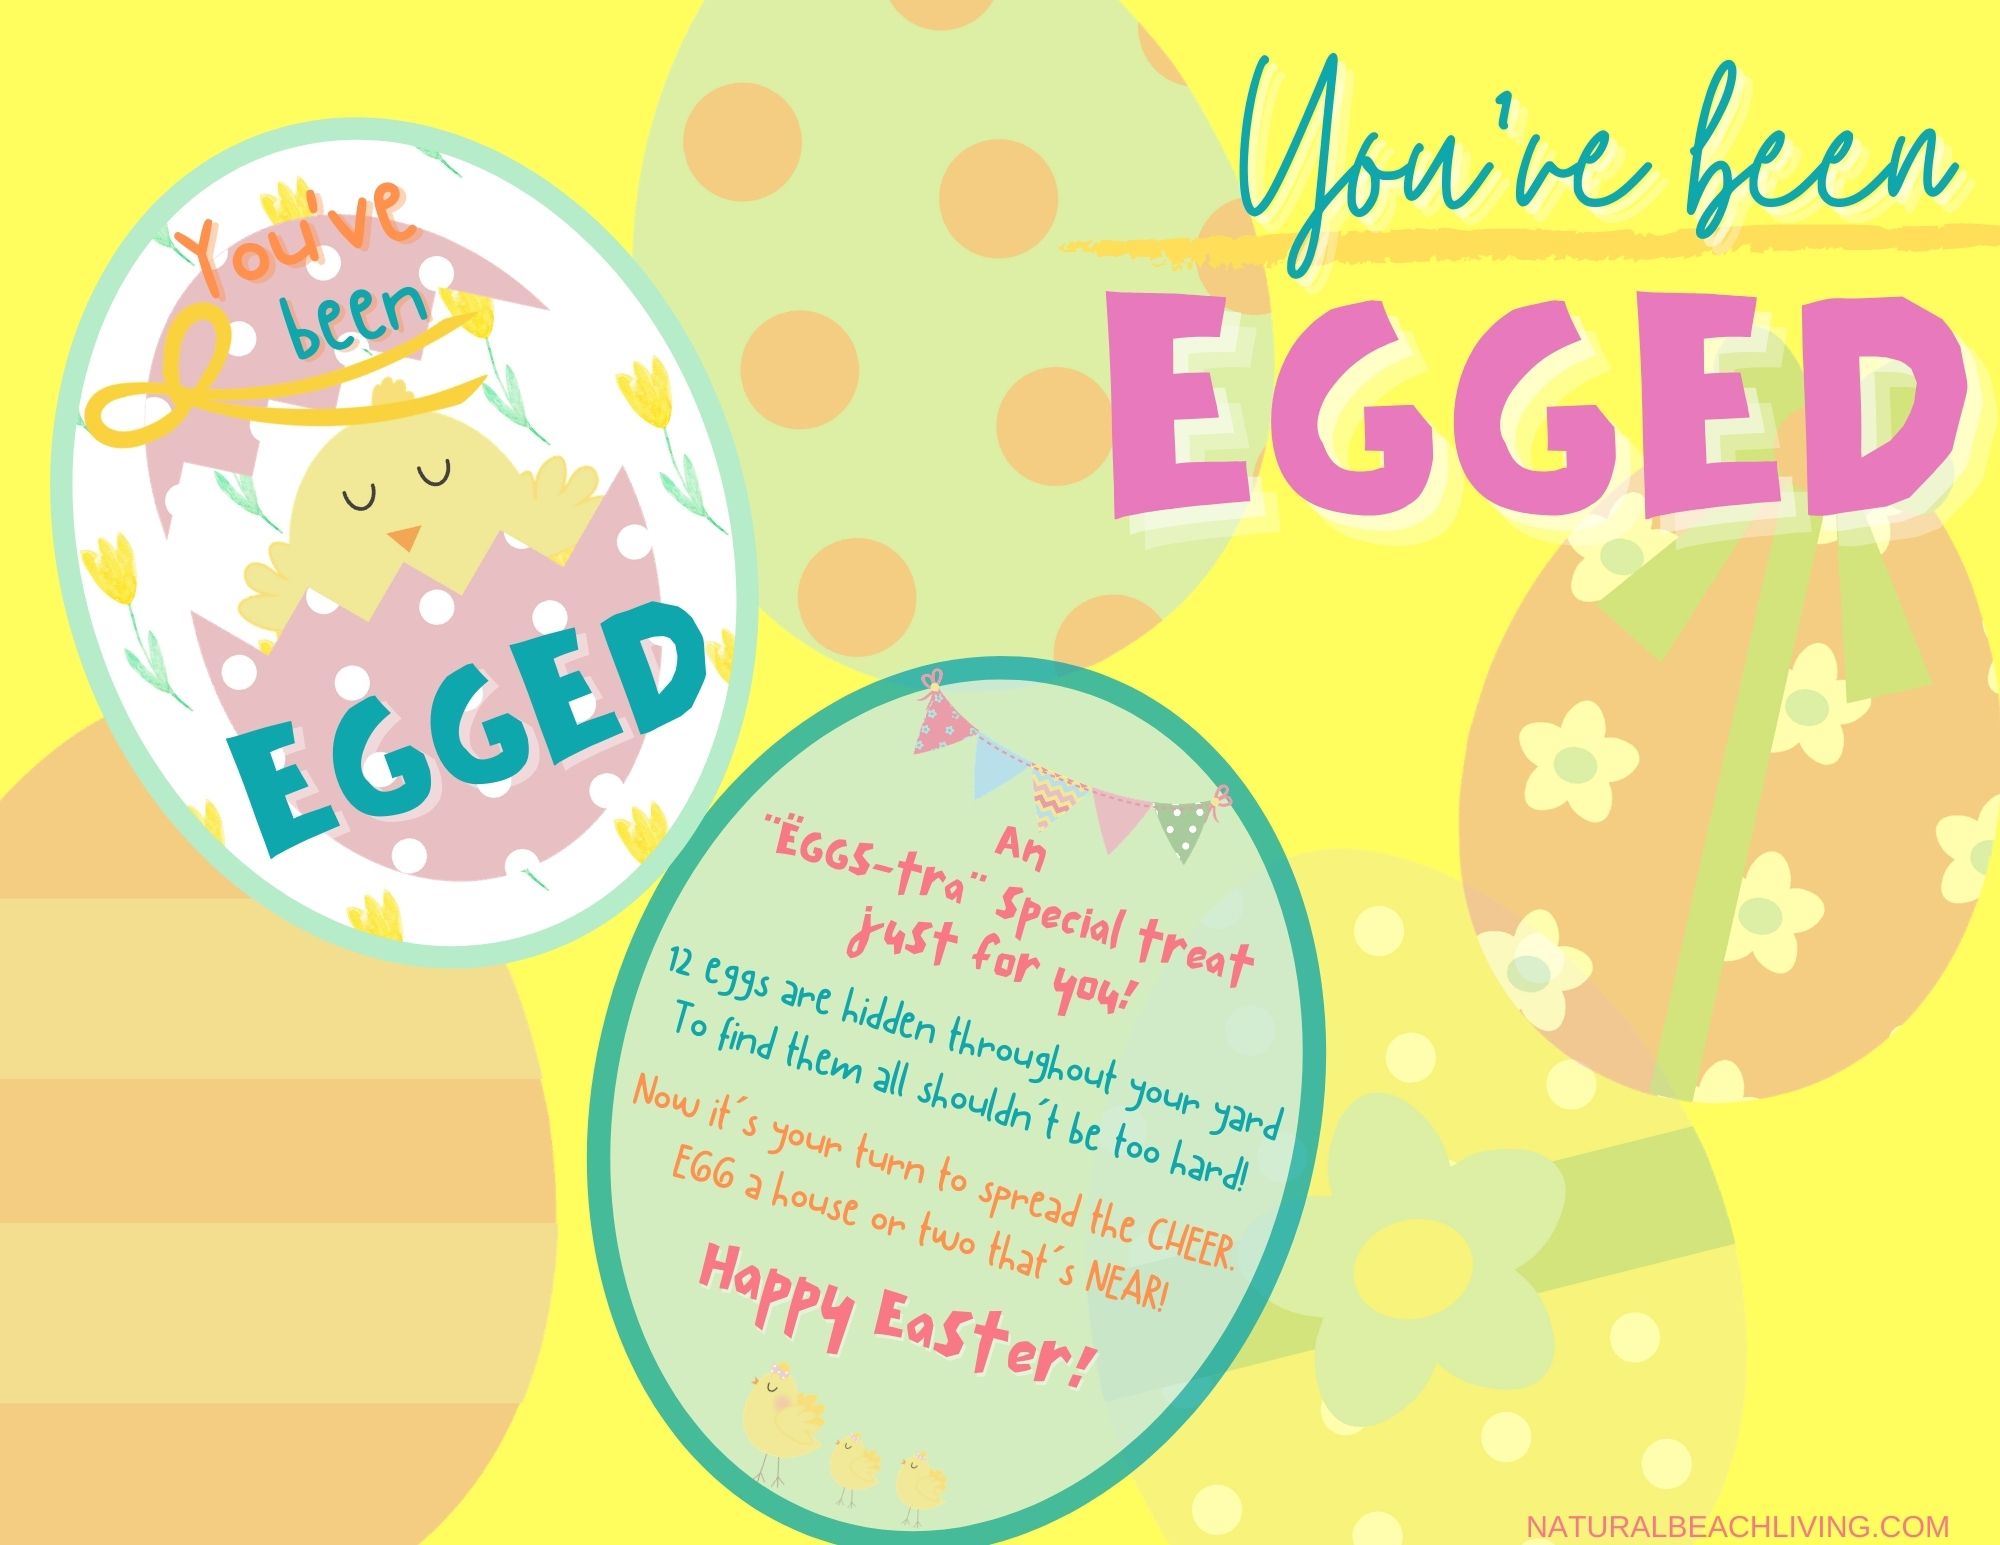 Spread a little extra kindness and cheer to your friends and neighbors this Easter with this great Random Acts of Kindness Activity. Hide Filled Easter Eggs around your neighborhood and use this You've Been Egged Kindness Printable for a fun Easter Surprise. 